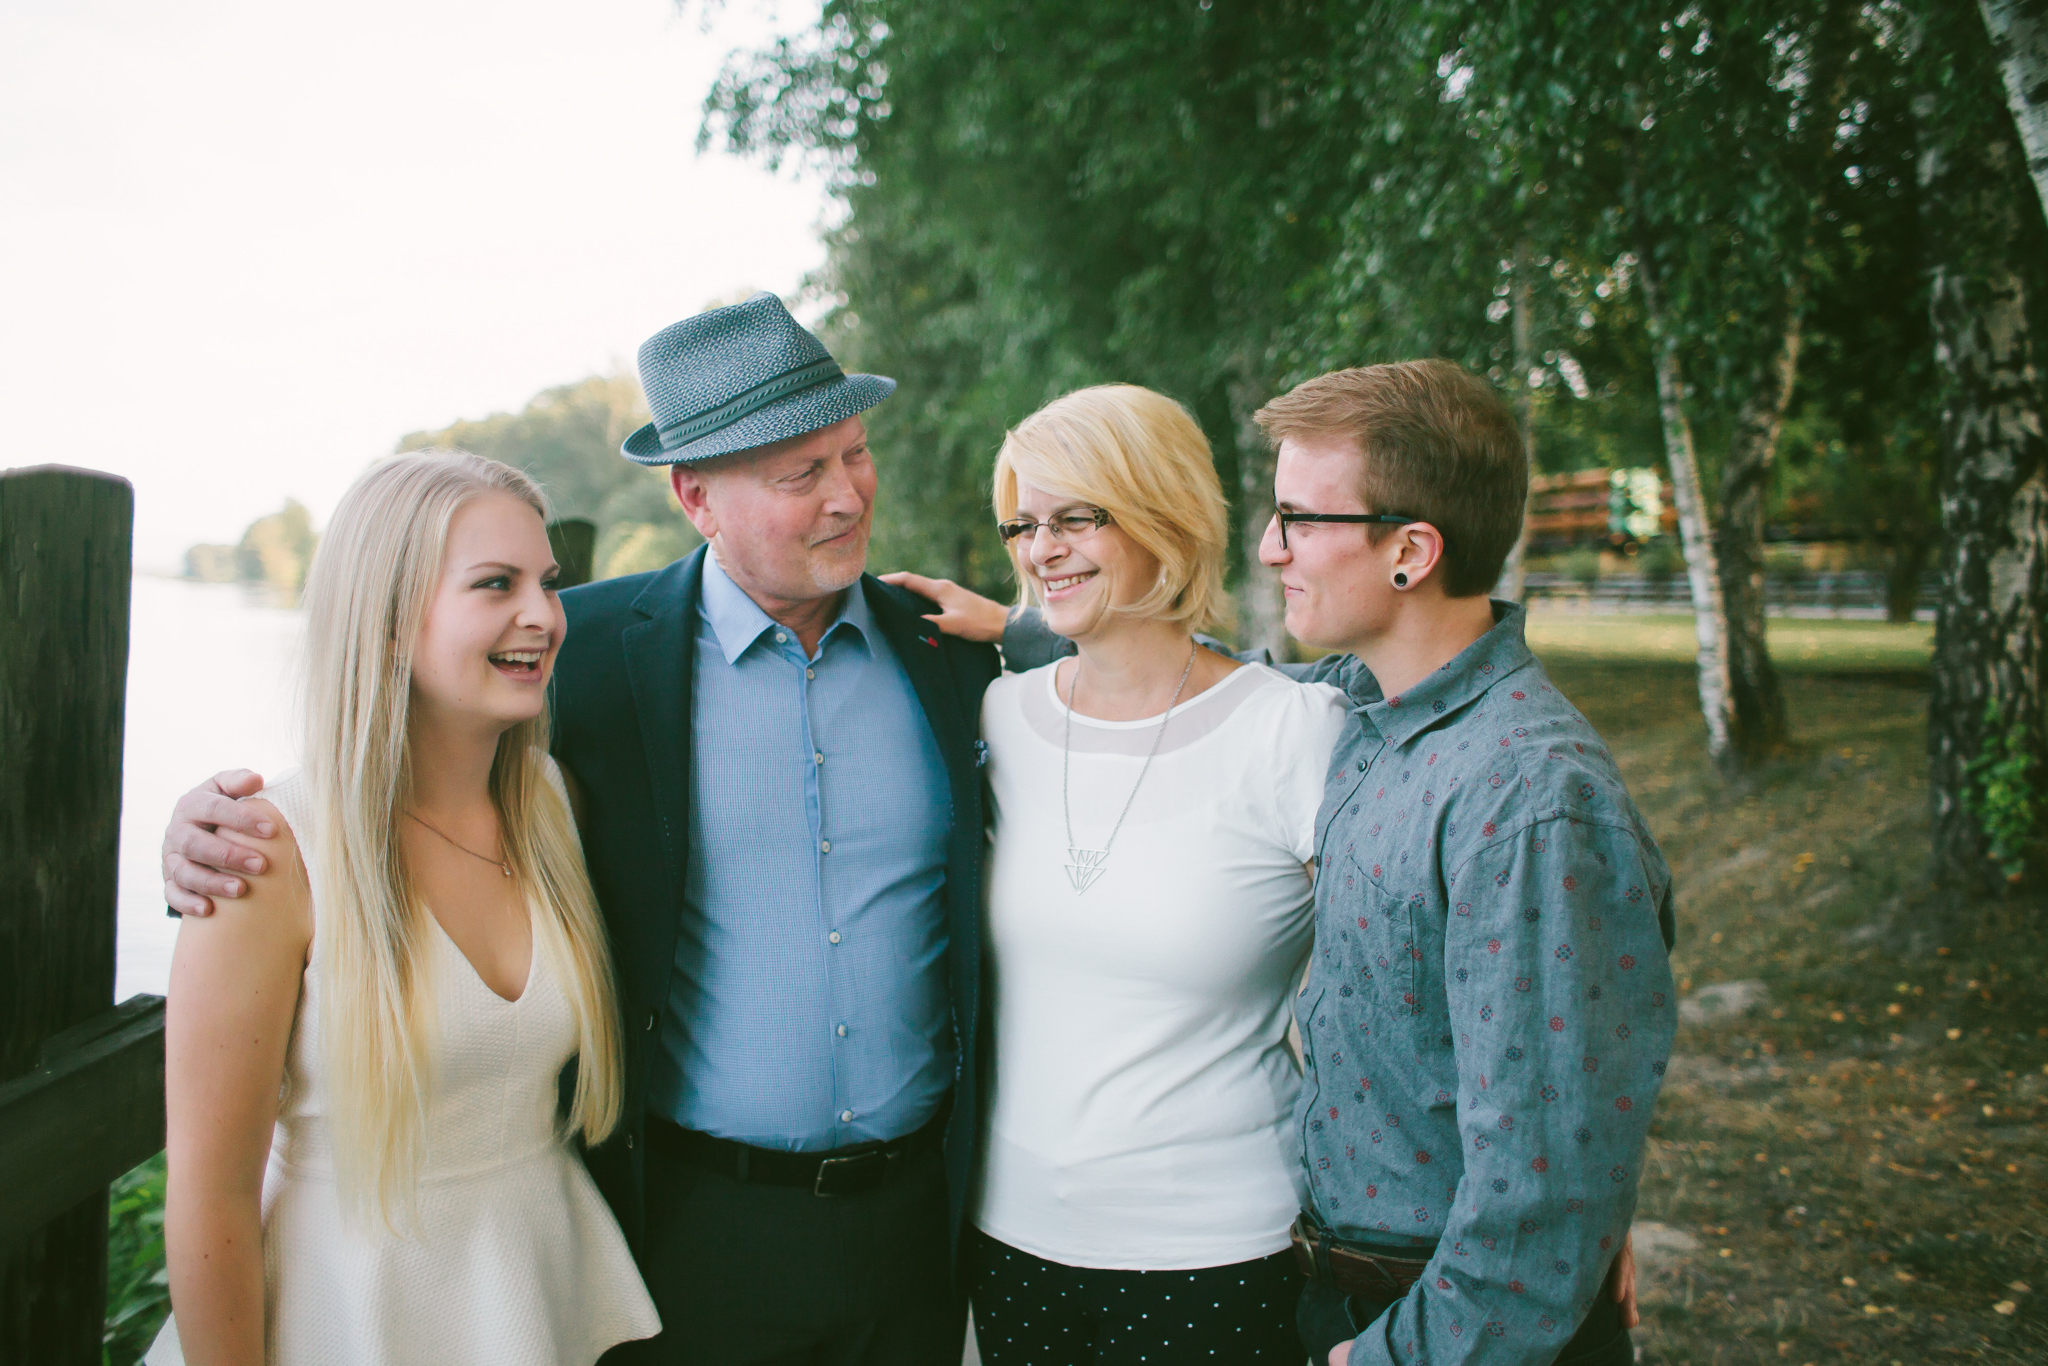 View More: http://michellekarstphotography.pass.us/harkerfamily2015